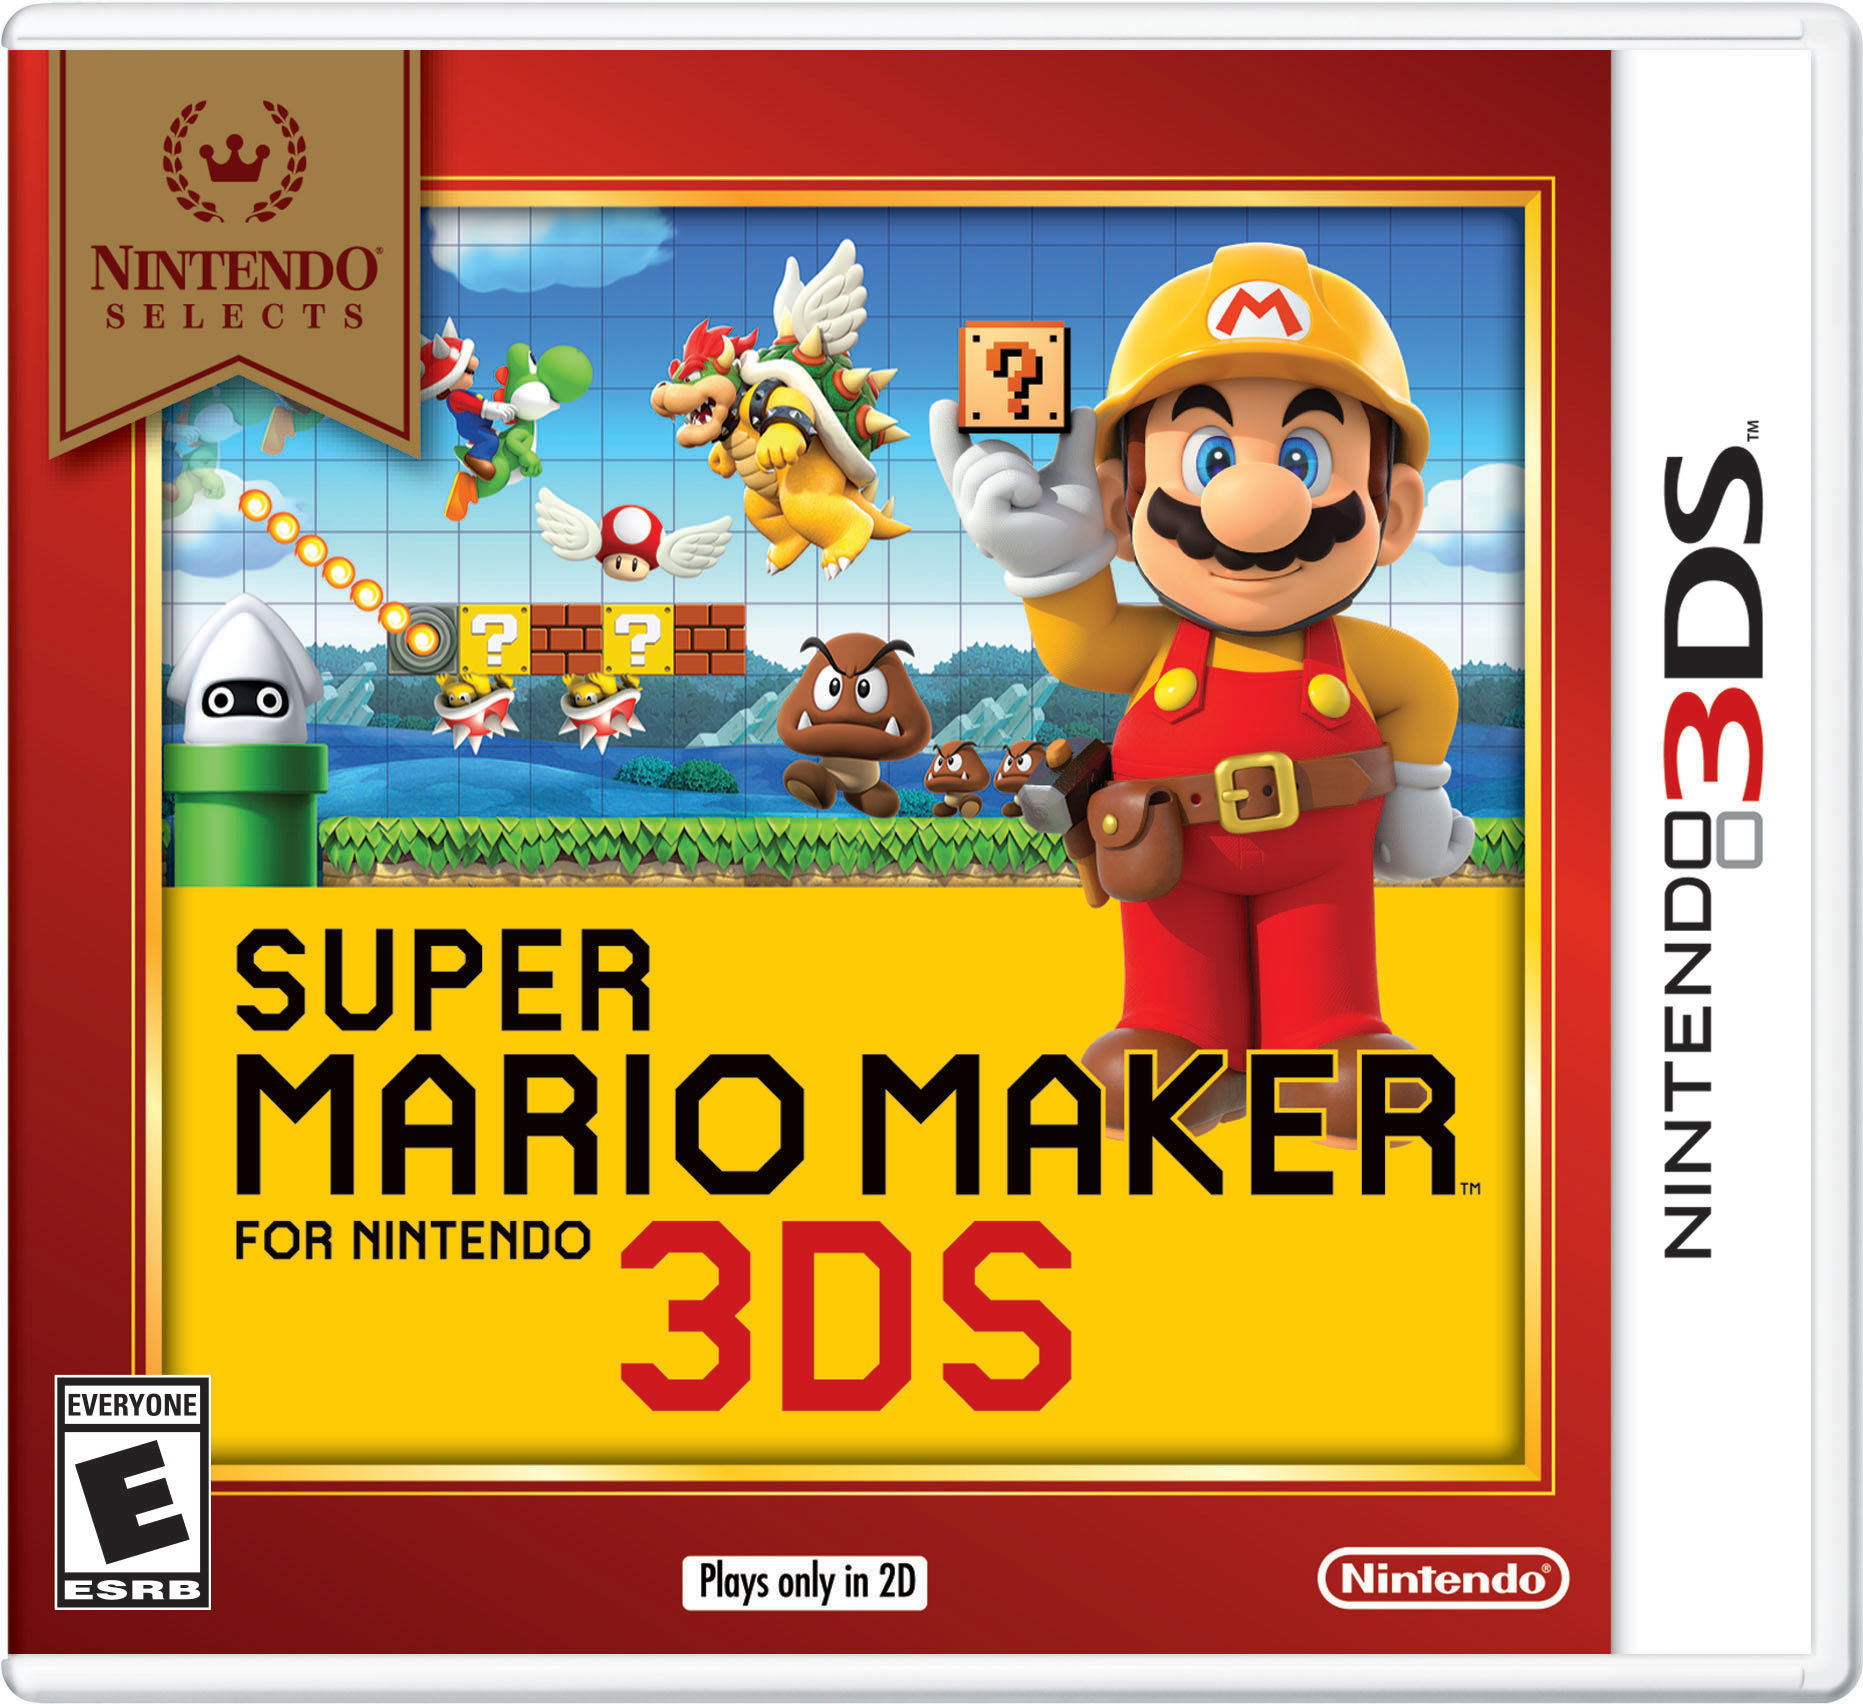 games only for new nintendo 3ds